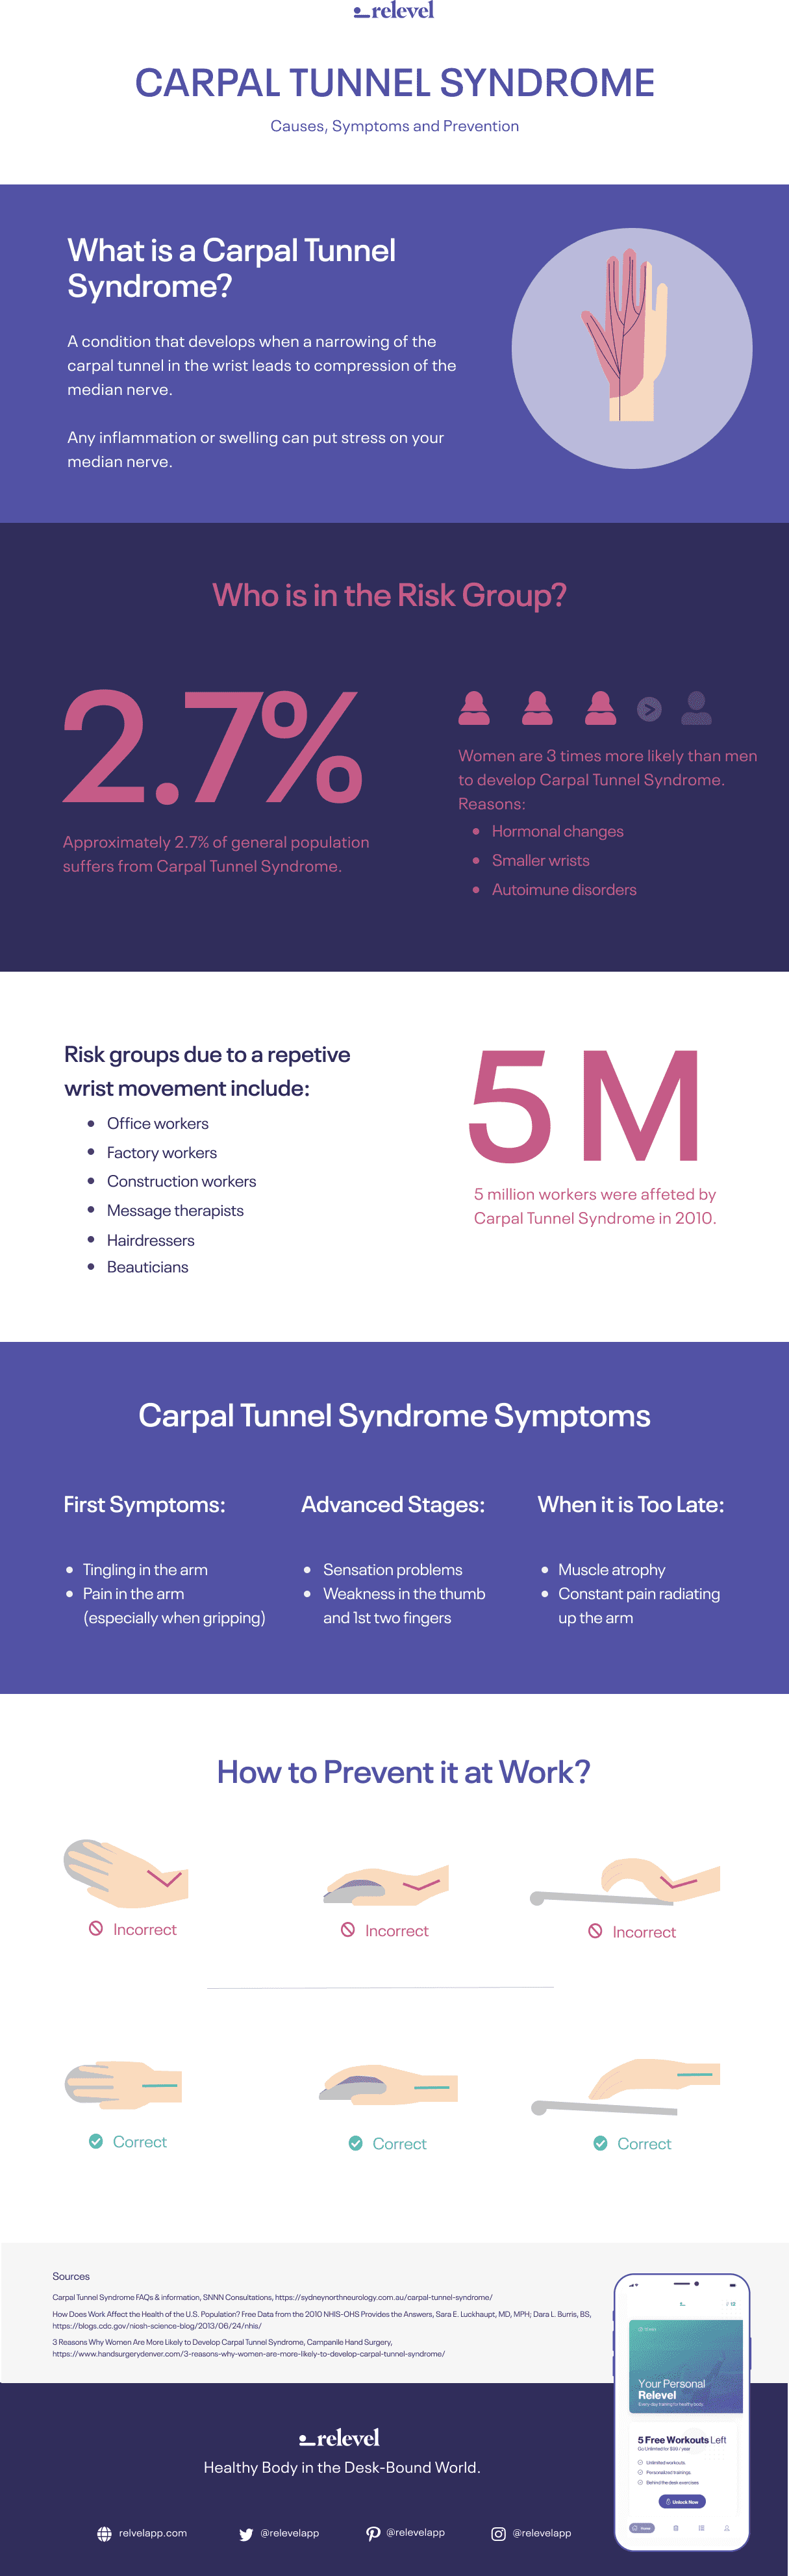 Carpal tunnel syndrome infographic